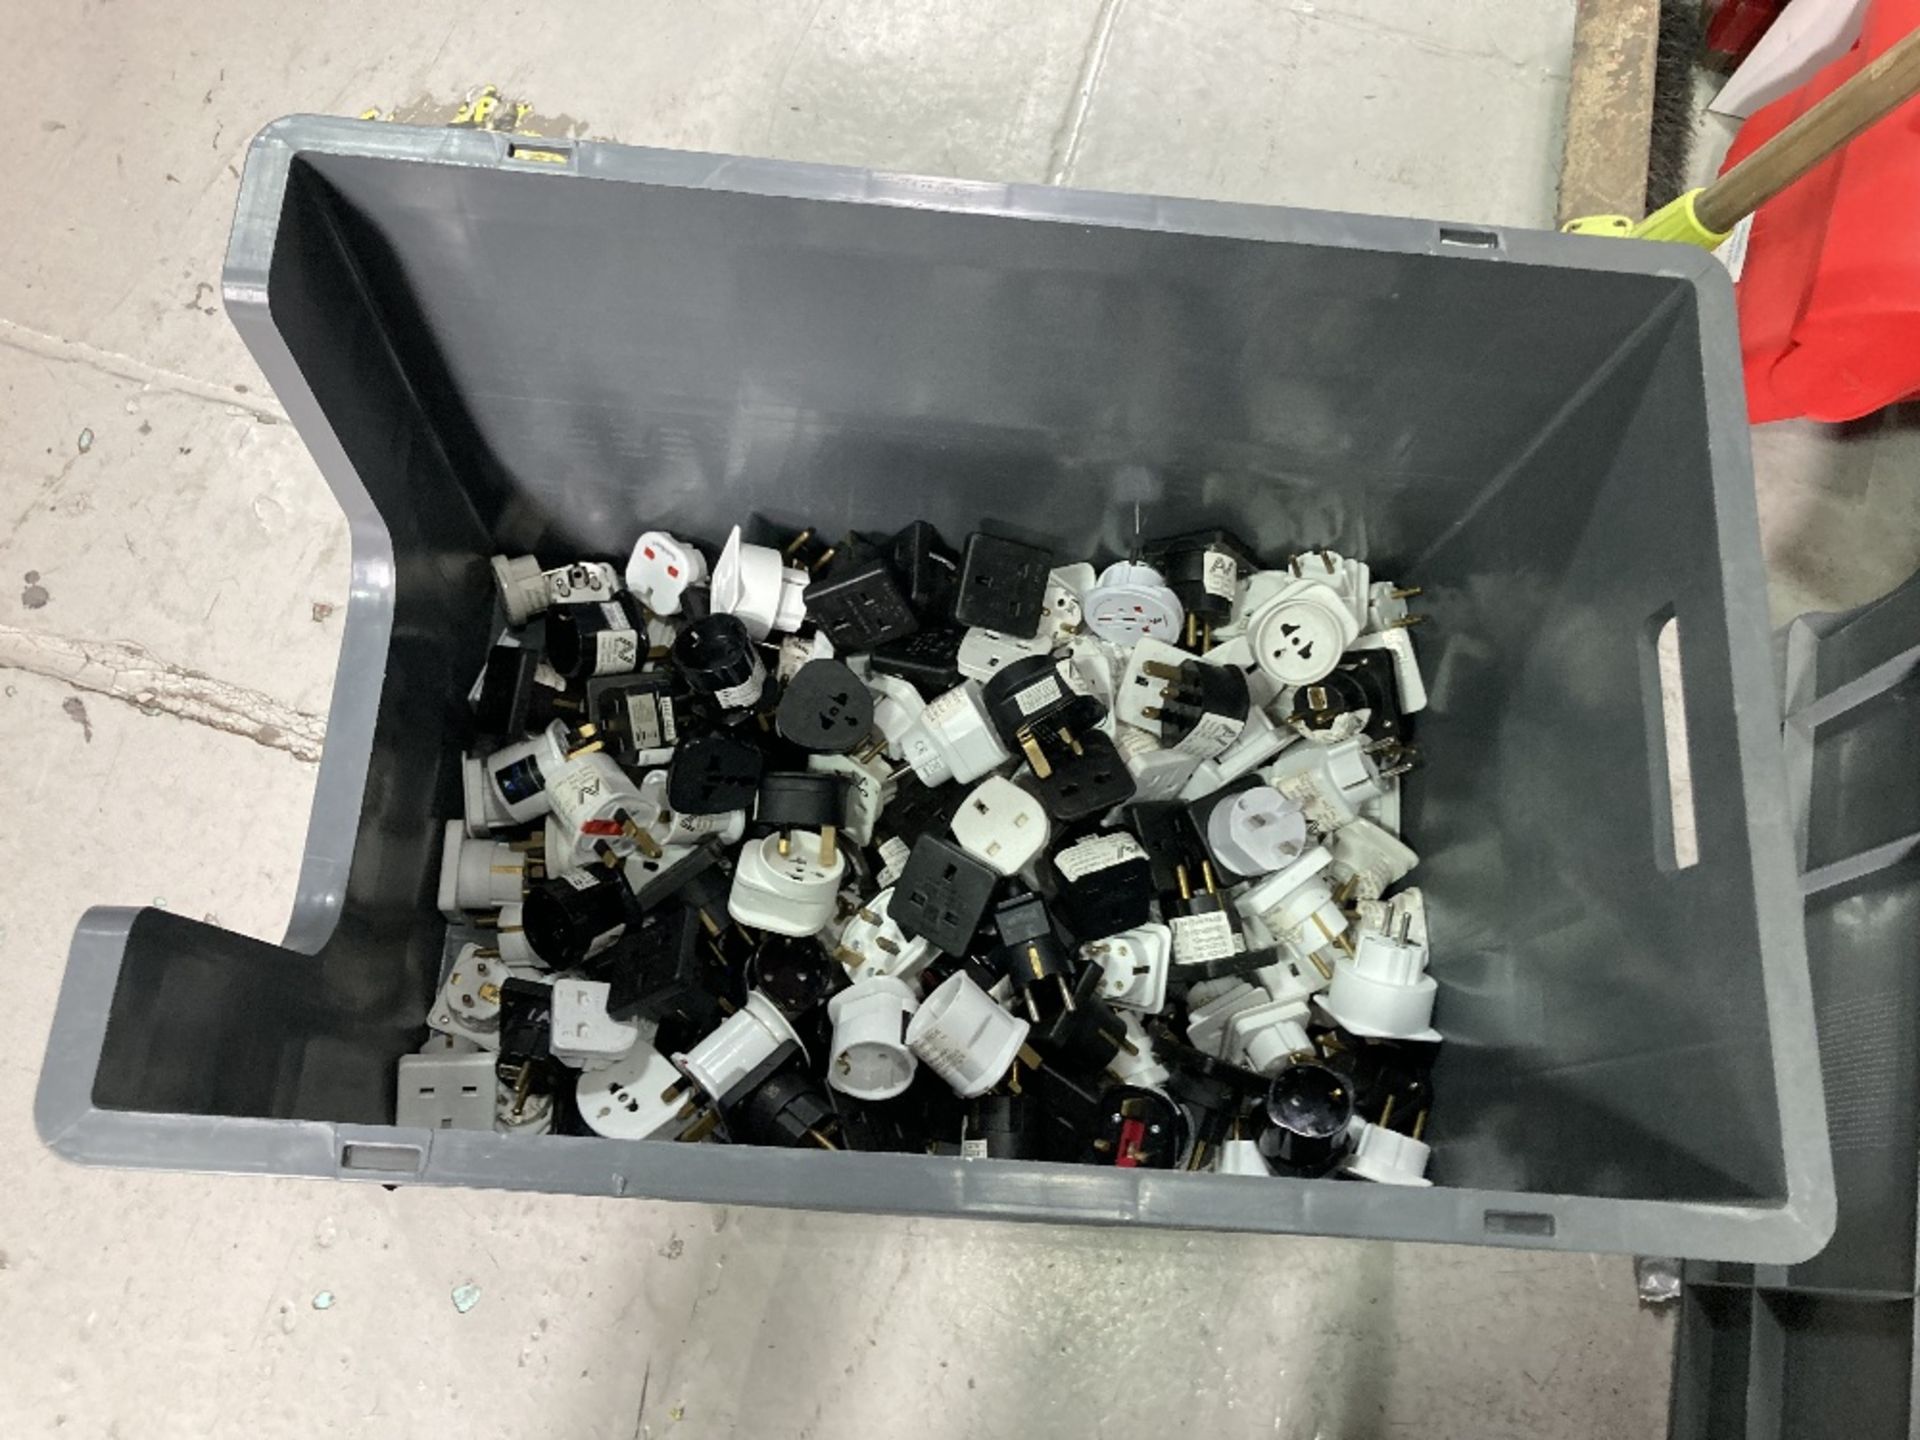 Quantity of 3-Pin Euro Socket Adapters With Plastic Lin Bin - Image 3 of 3